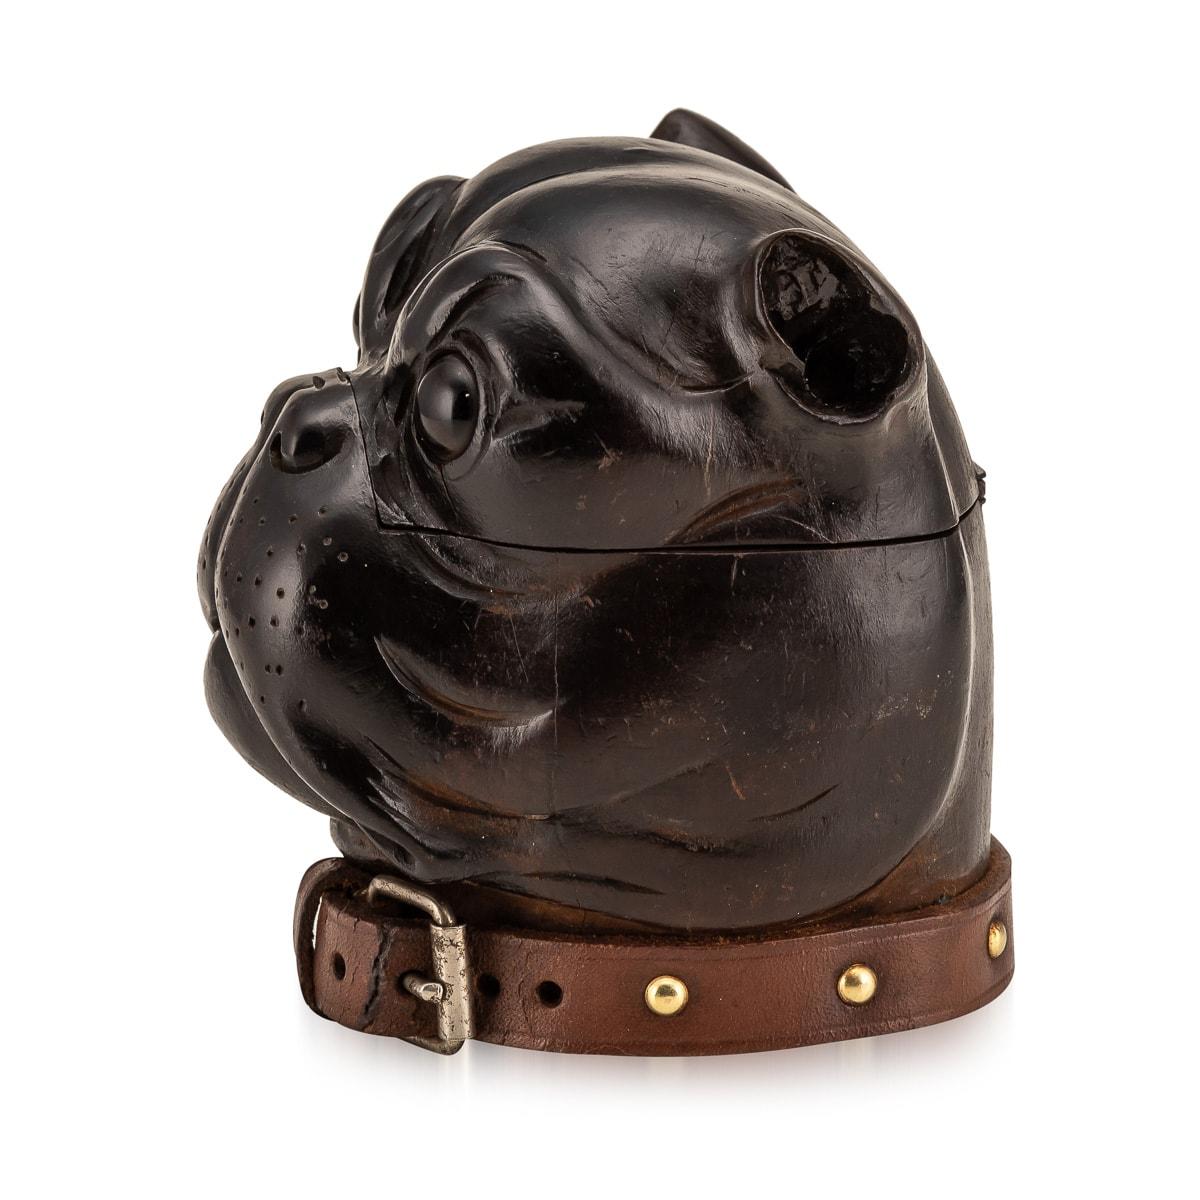 Antique 19th century Victorian lignum vitae inkwell modelled as the head of a bulldog with realistic red glass inset eyes, original leather collar with a copper buckle. The head is hinged and opens to reveal an empty ink pot insert compartment with